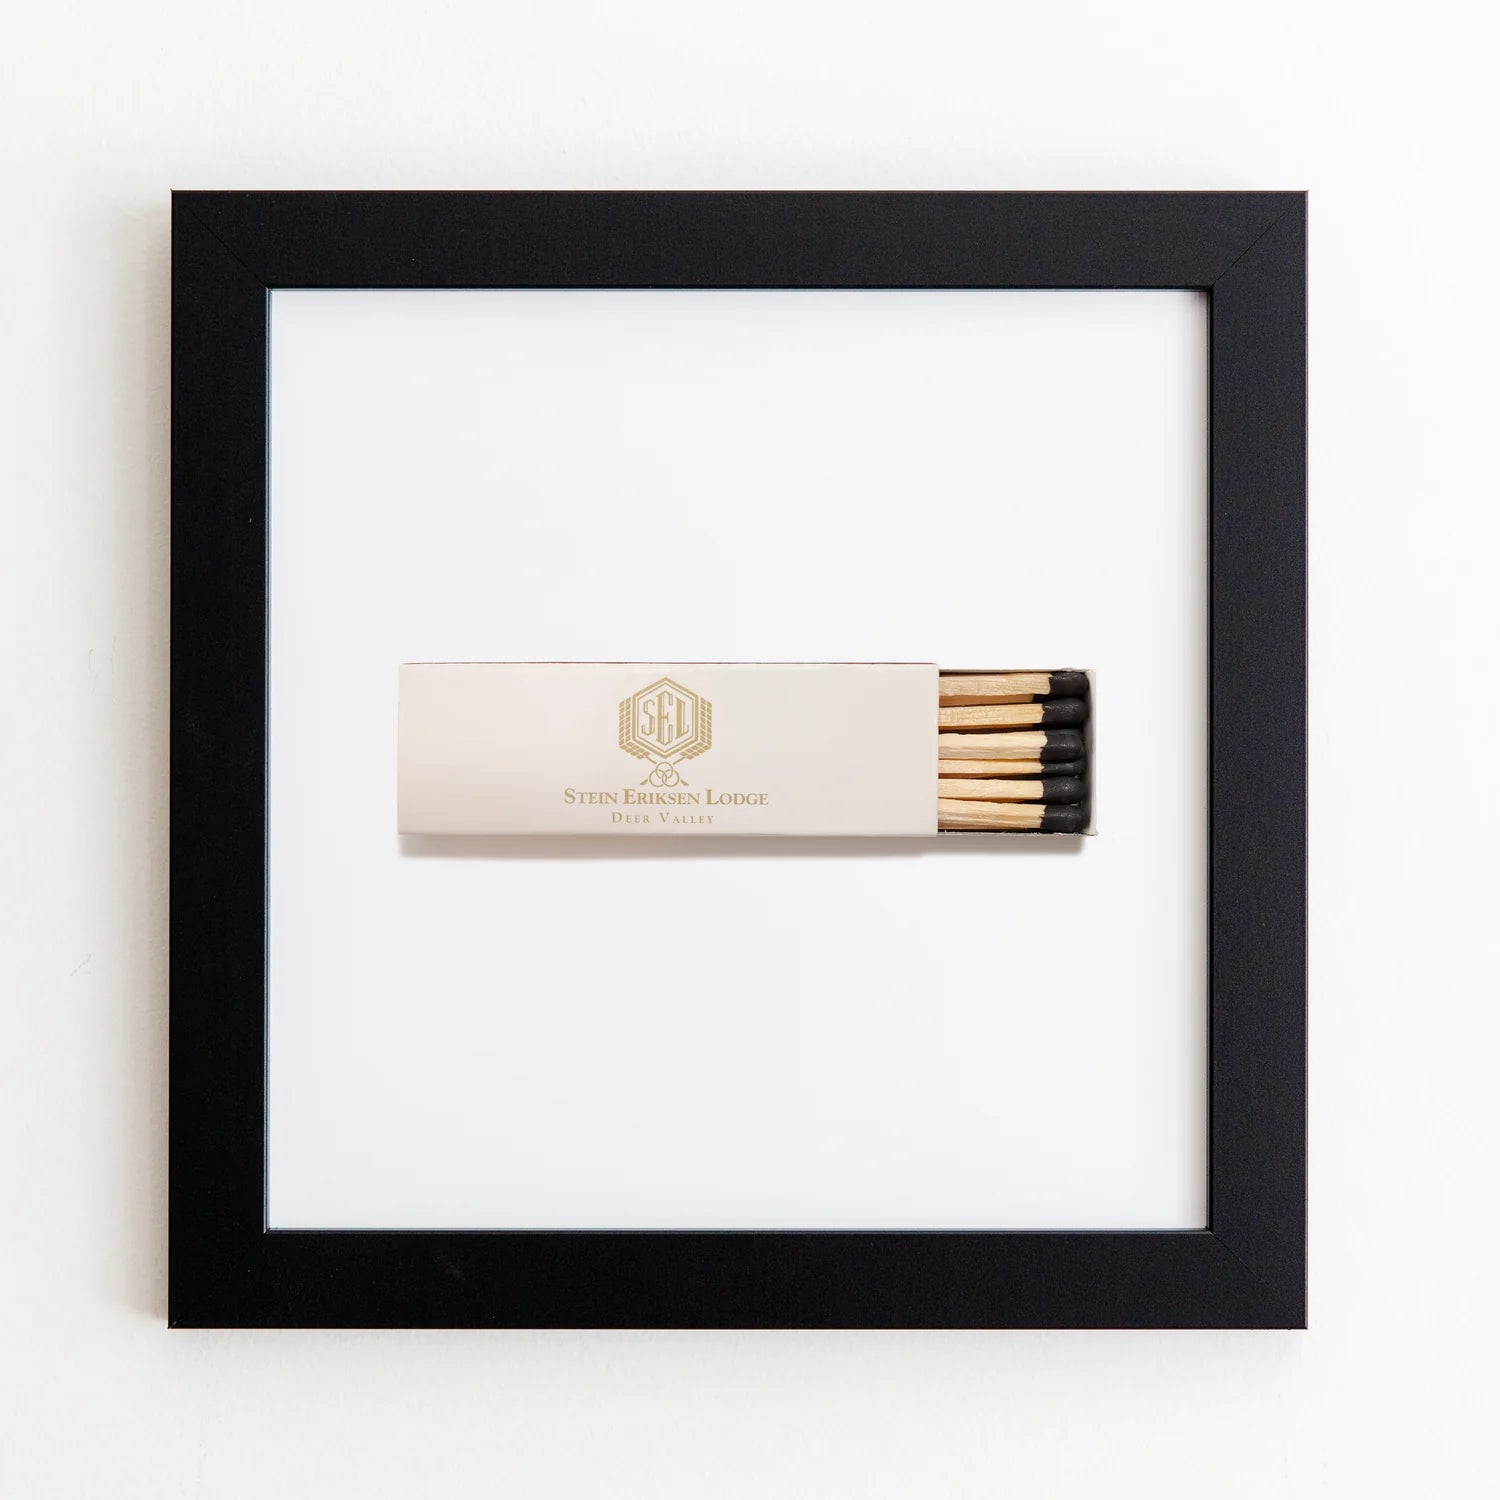 A matchbox labeled &quot;Stein Eriksen Lodge Deer Valley&quot; is centered within a Art Square Black Frame against a white background. The matchbox is beige with a gold design and contains black-tipped matches.